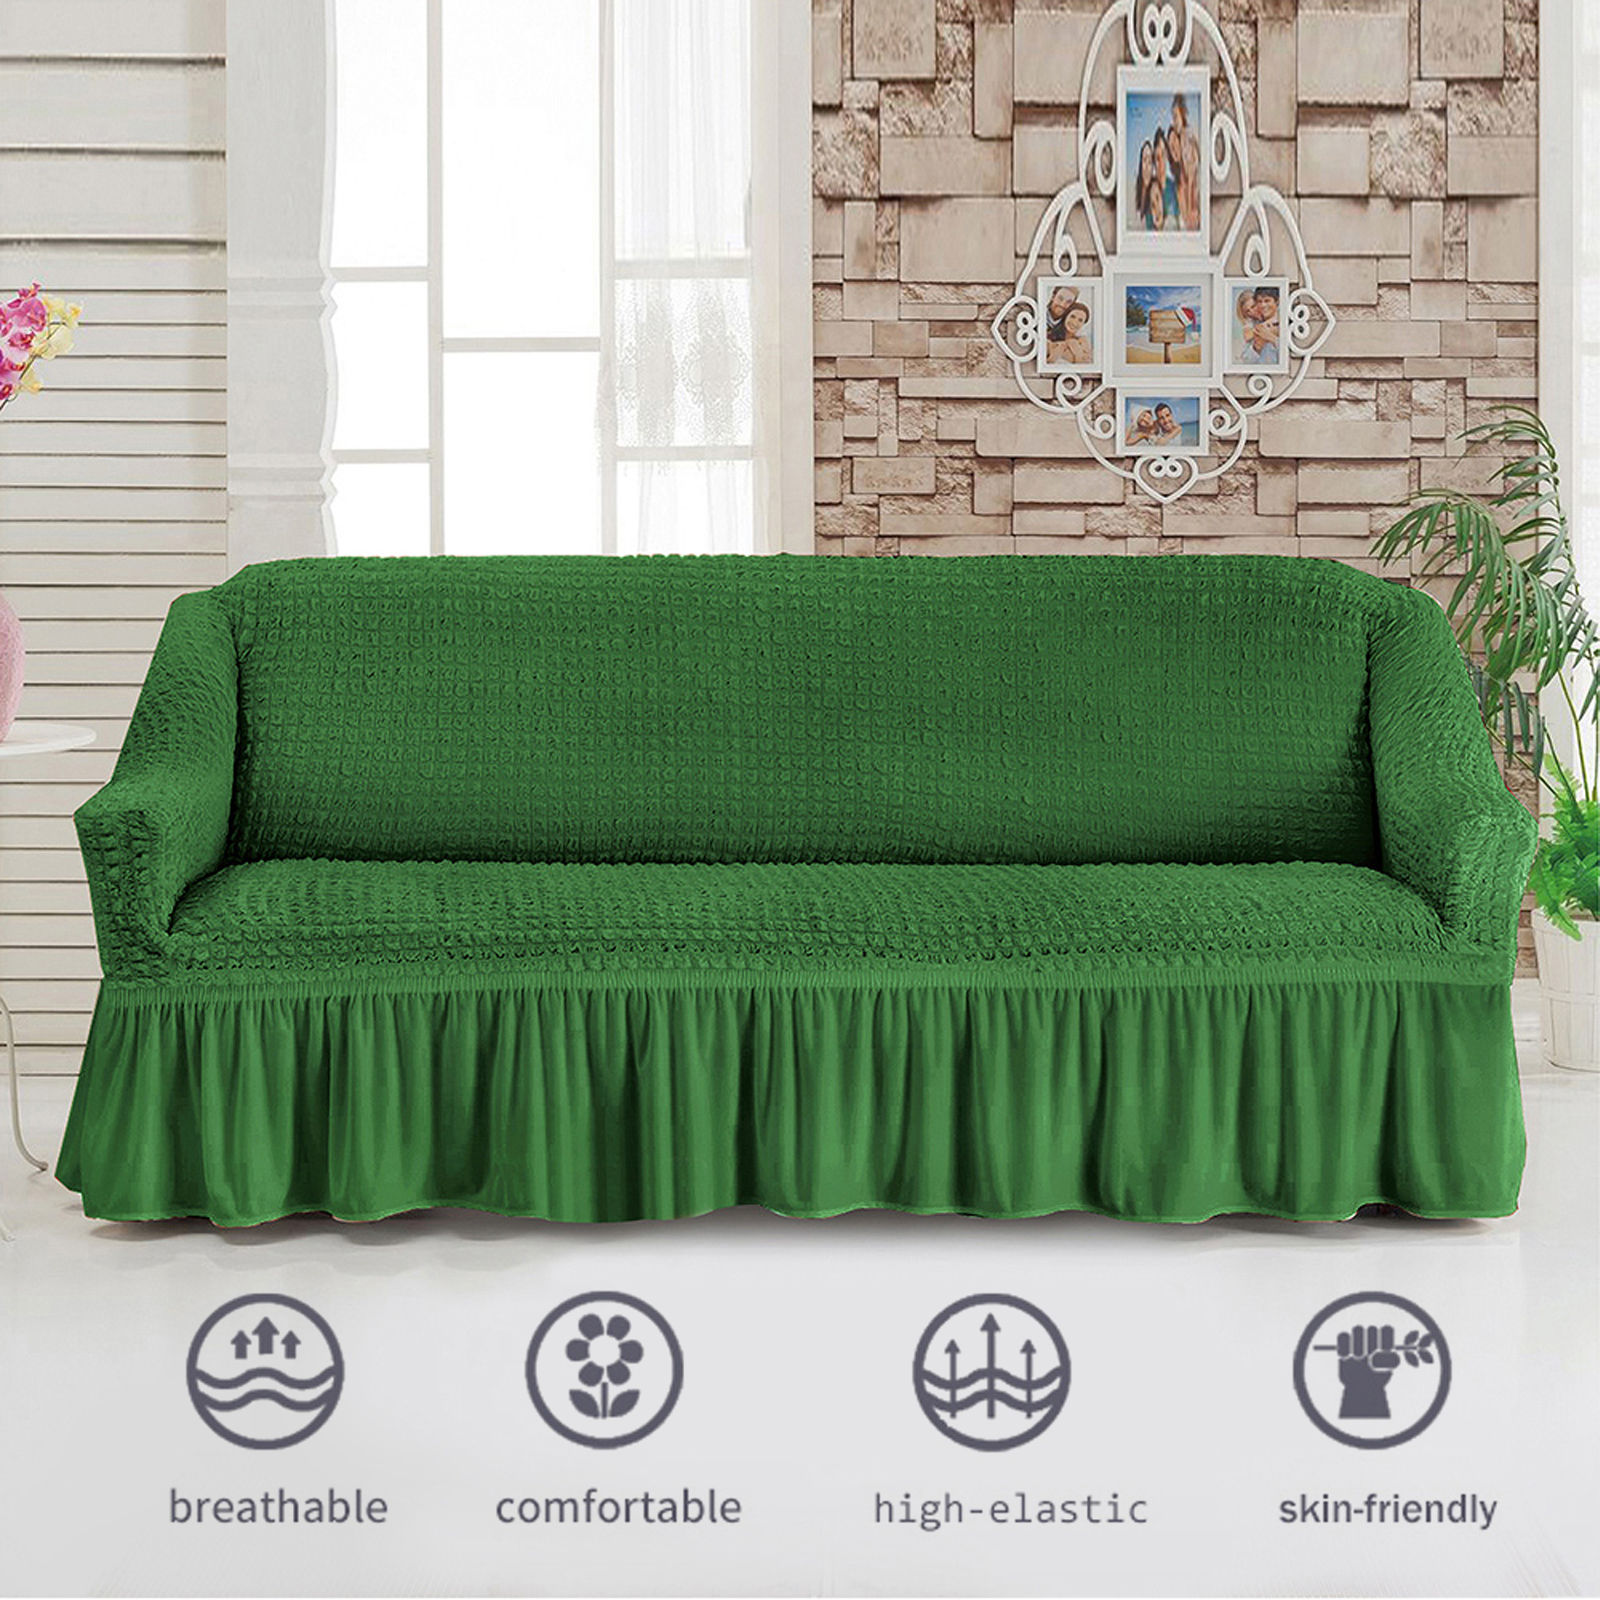 Stretch Sofa Slipcover, 3 Seater Sofa Slipcovers With Skirt With Armless Soft Sofa Cover Elastic Straps Sofa Slipcover For Living Room Kids Pets-Green A-Medium